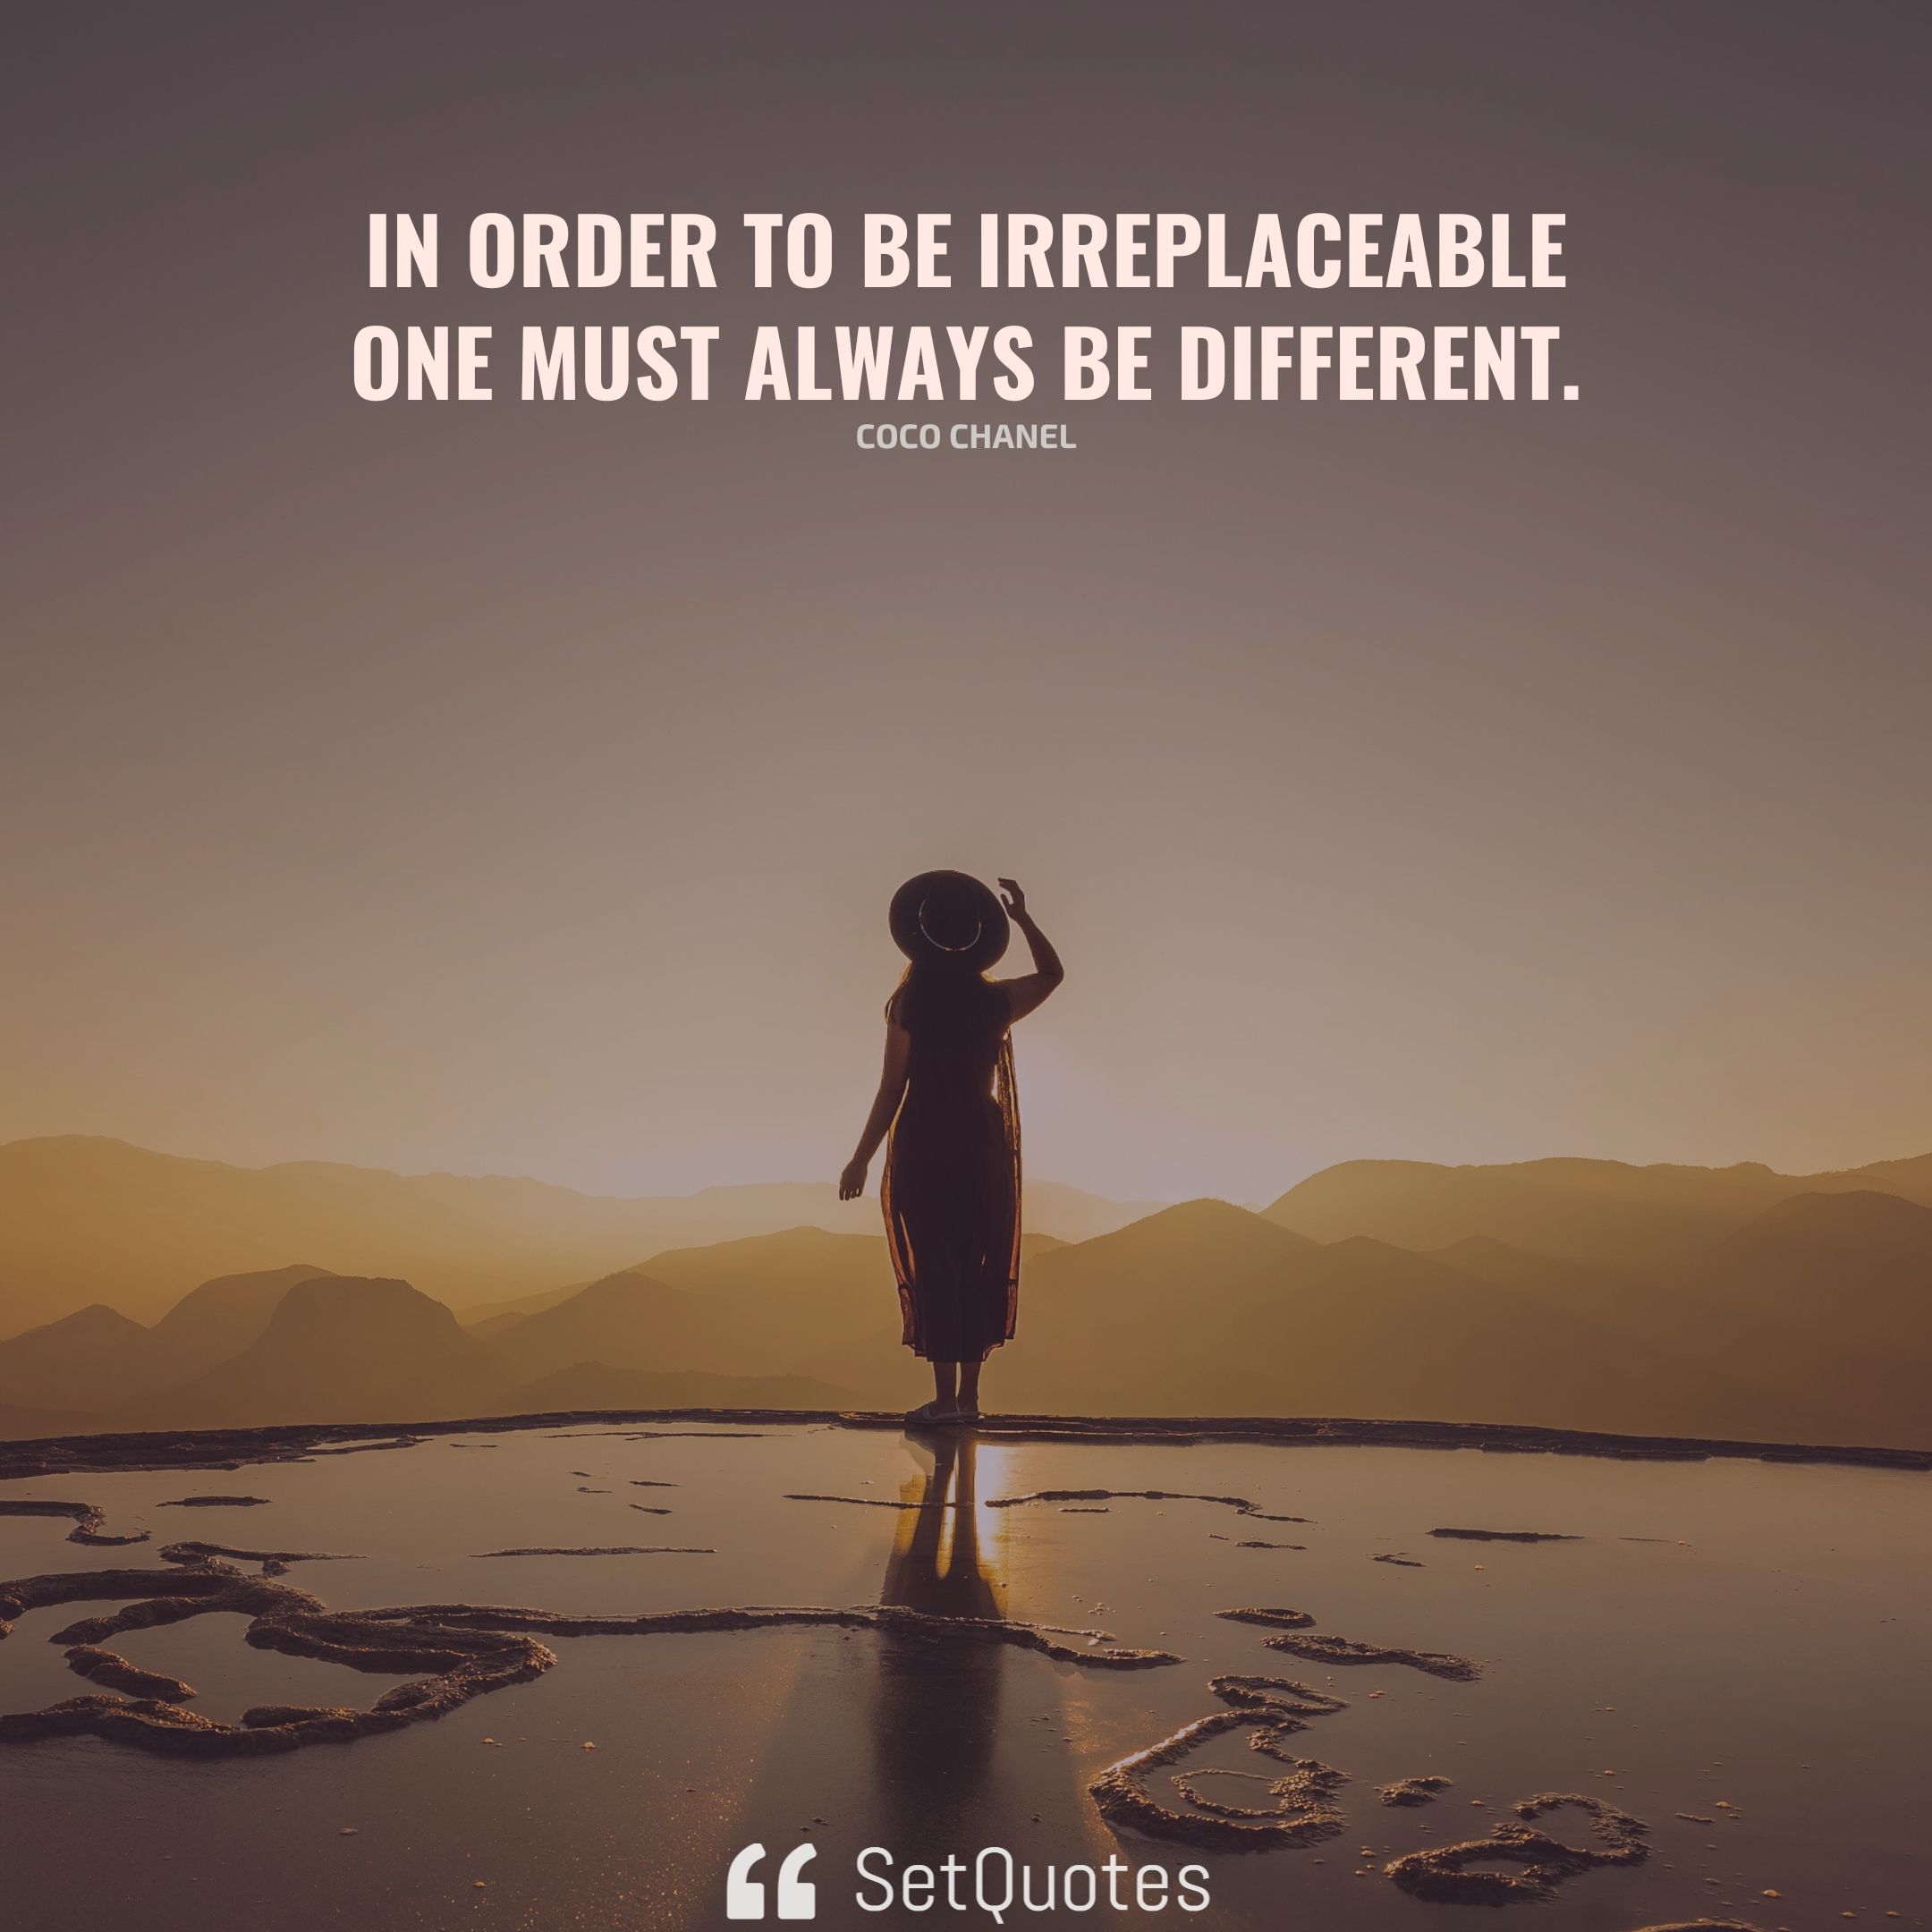 In order to be irreplaceable one must always be different.